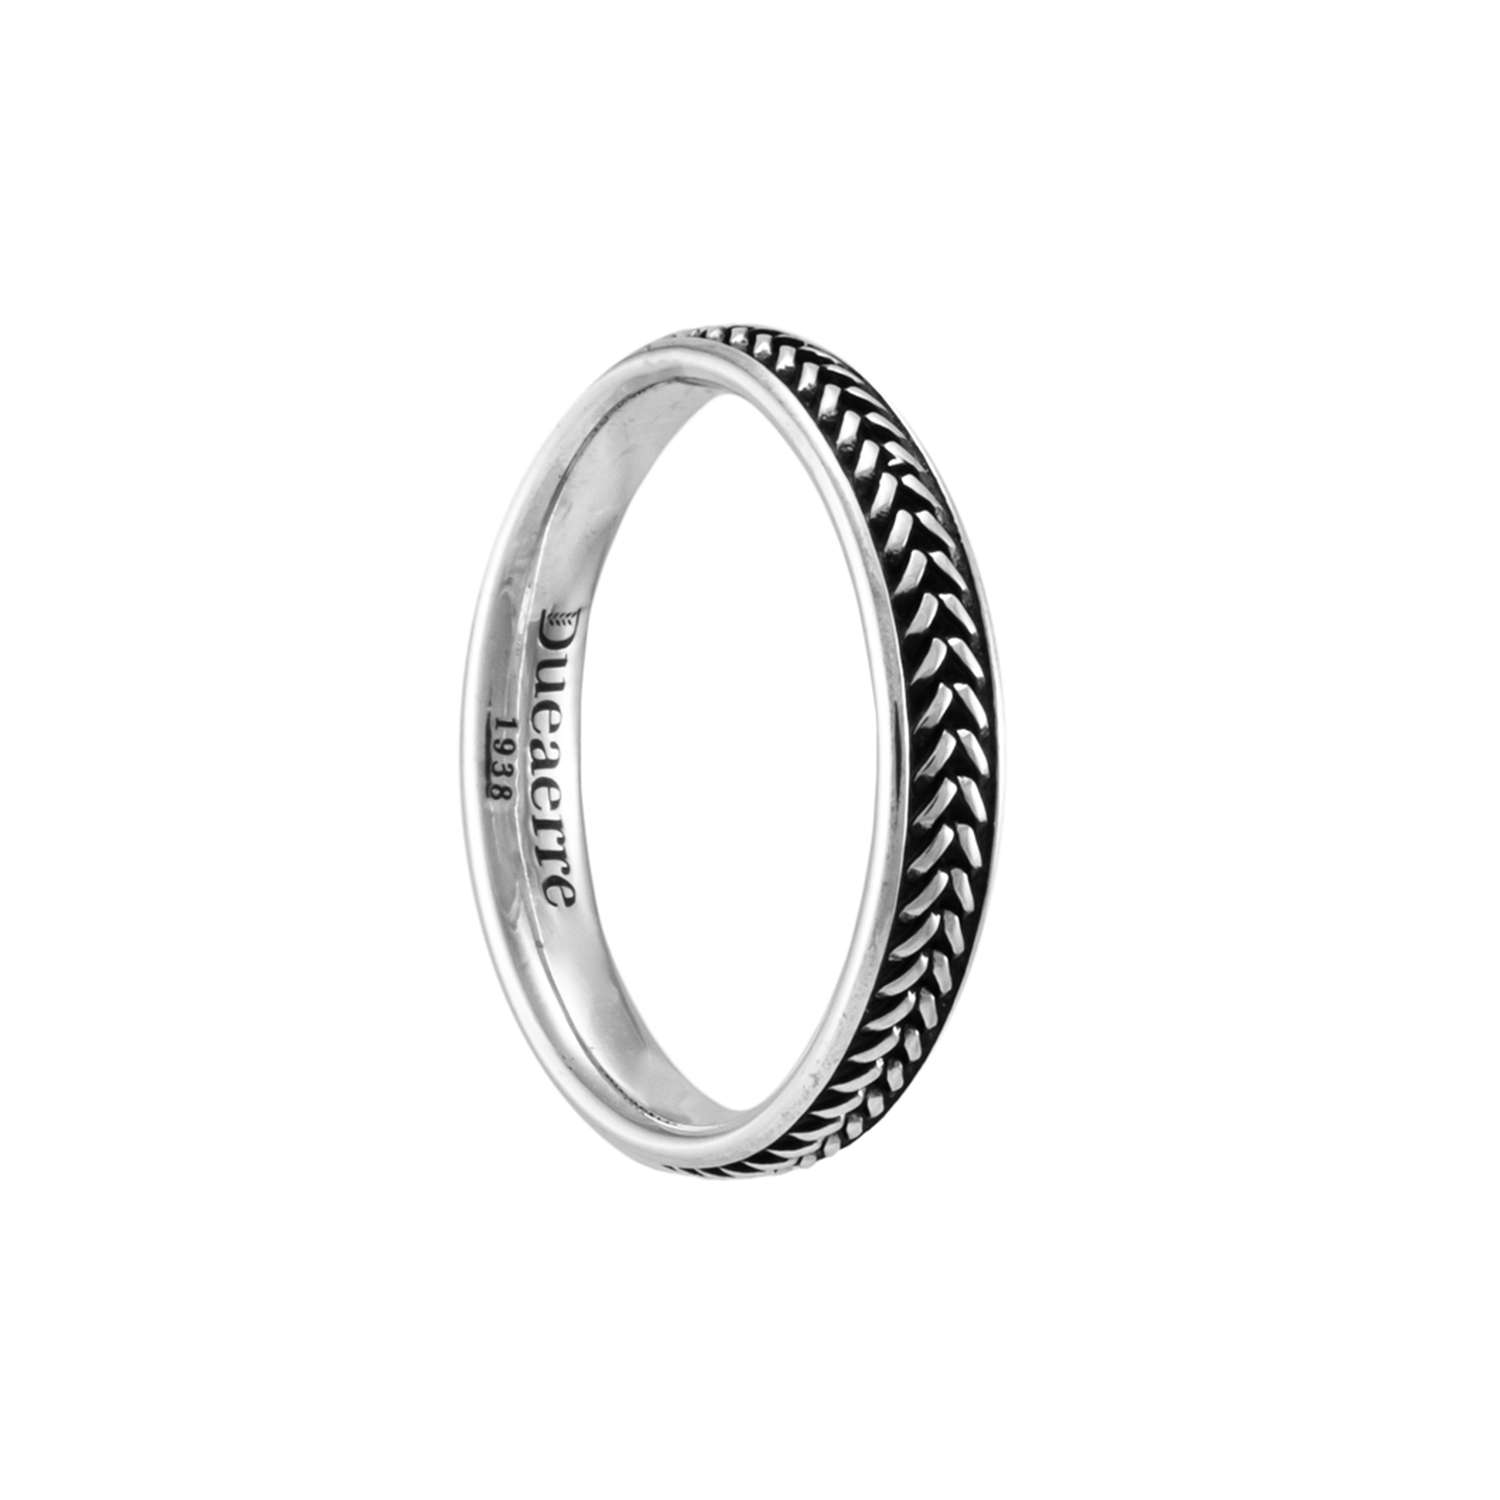 Burnished silver men's ring - DUEAERRE 1938